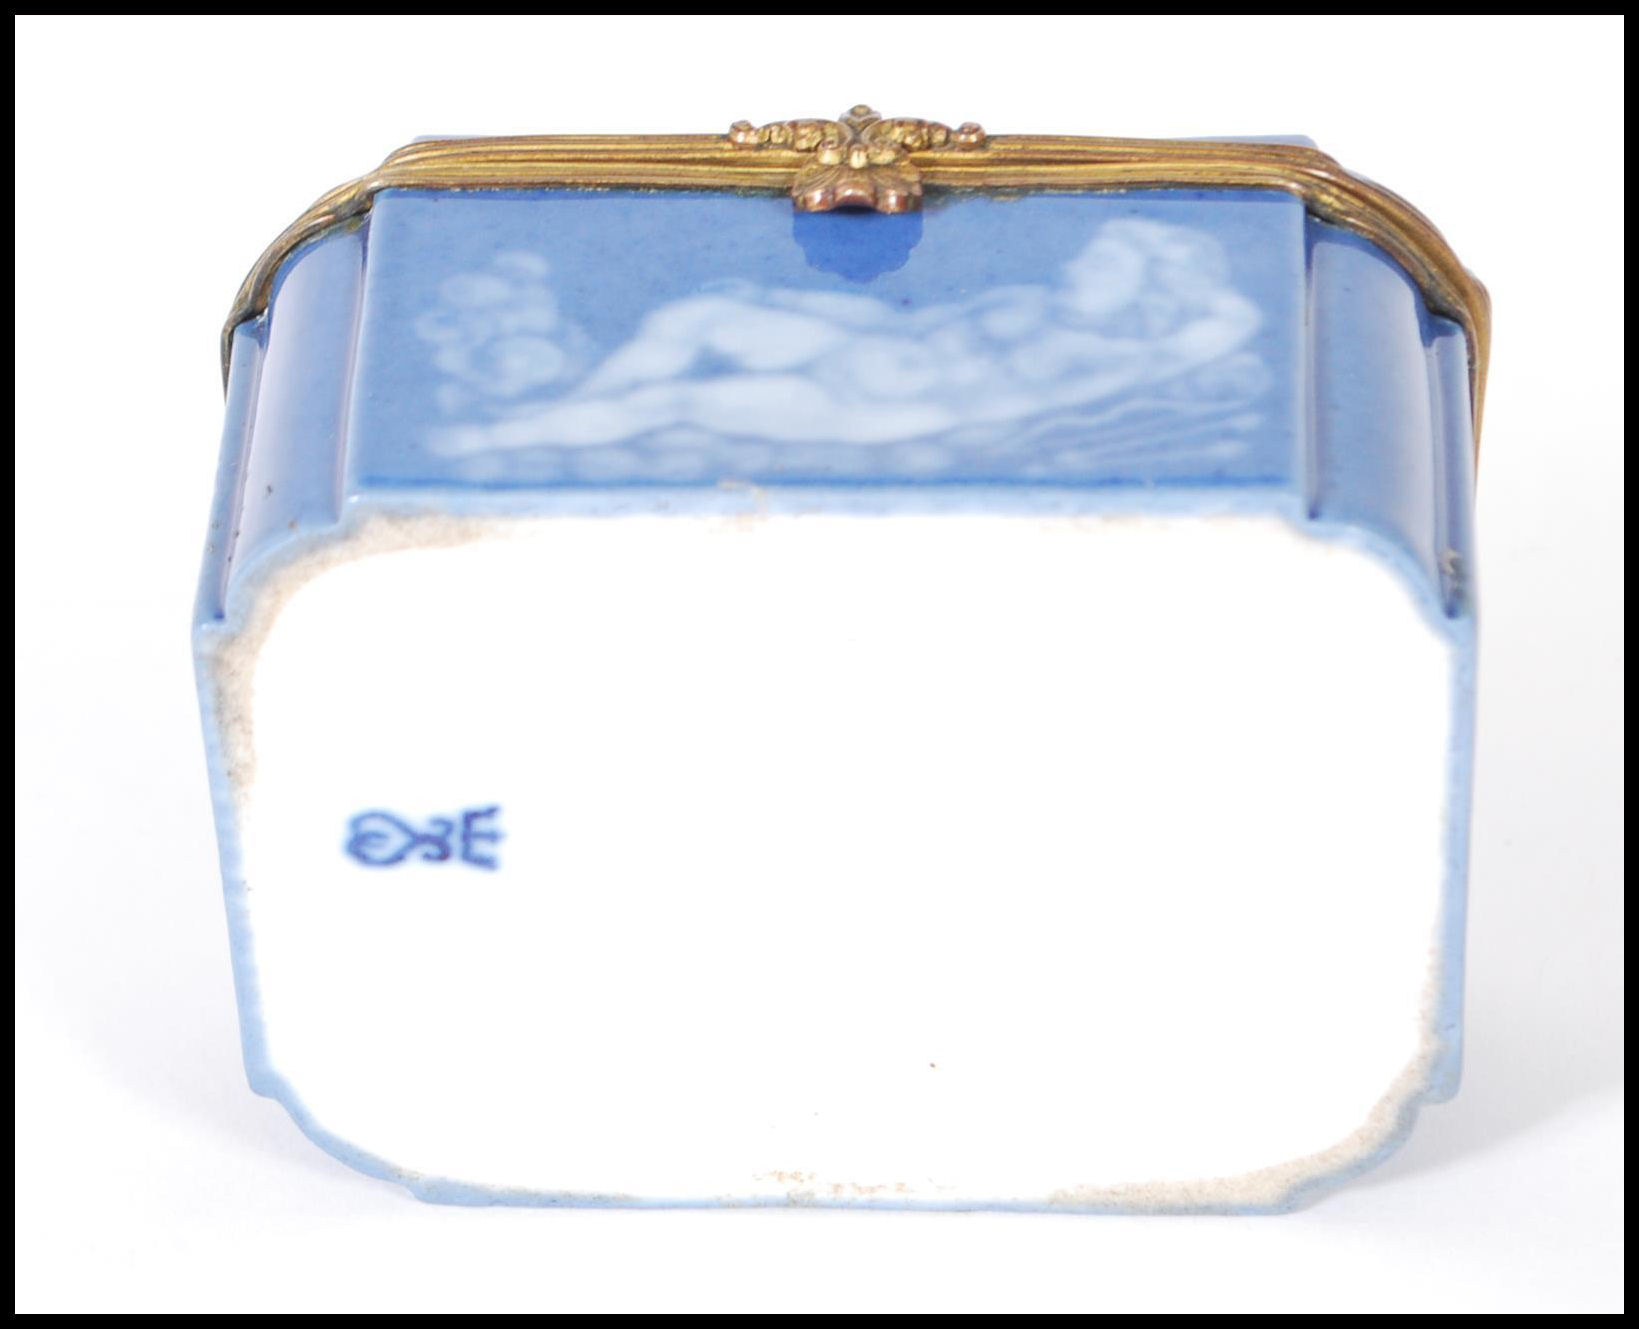 An early 20th Century continental German porcelain blue ceramic casket / trinket box with a pat - Image 9 of 9